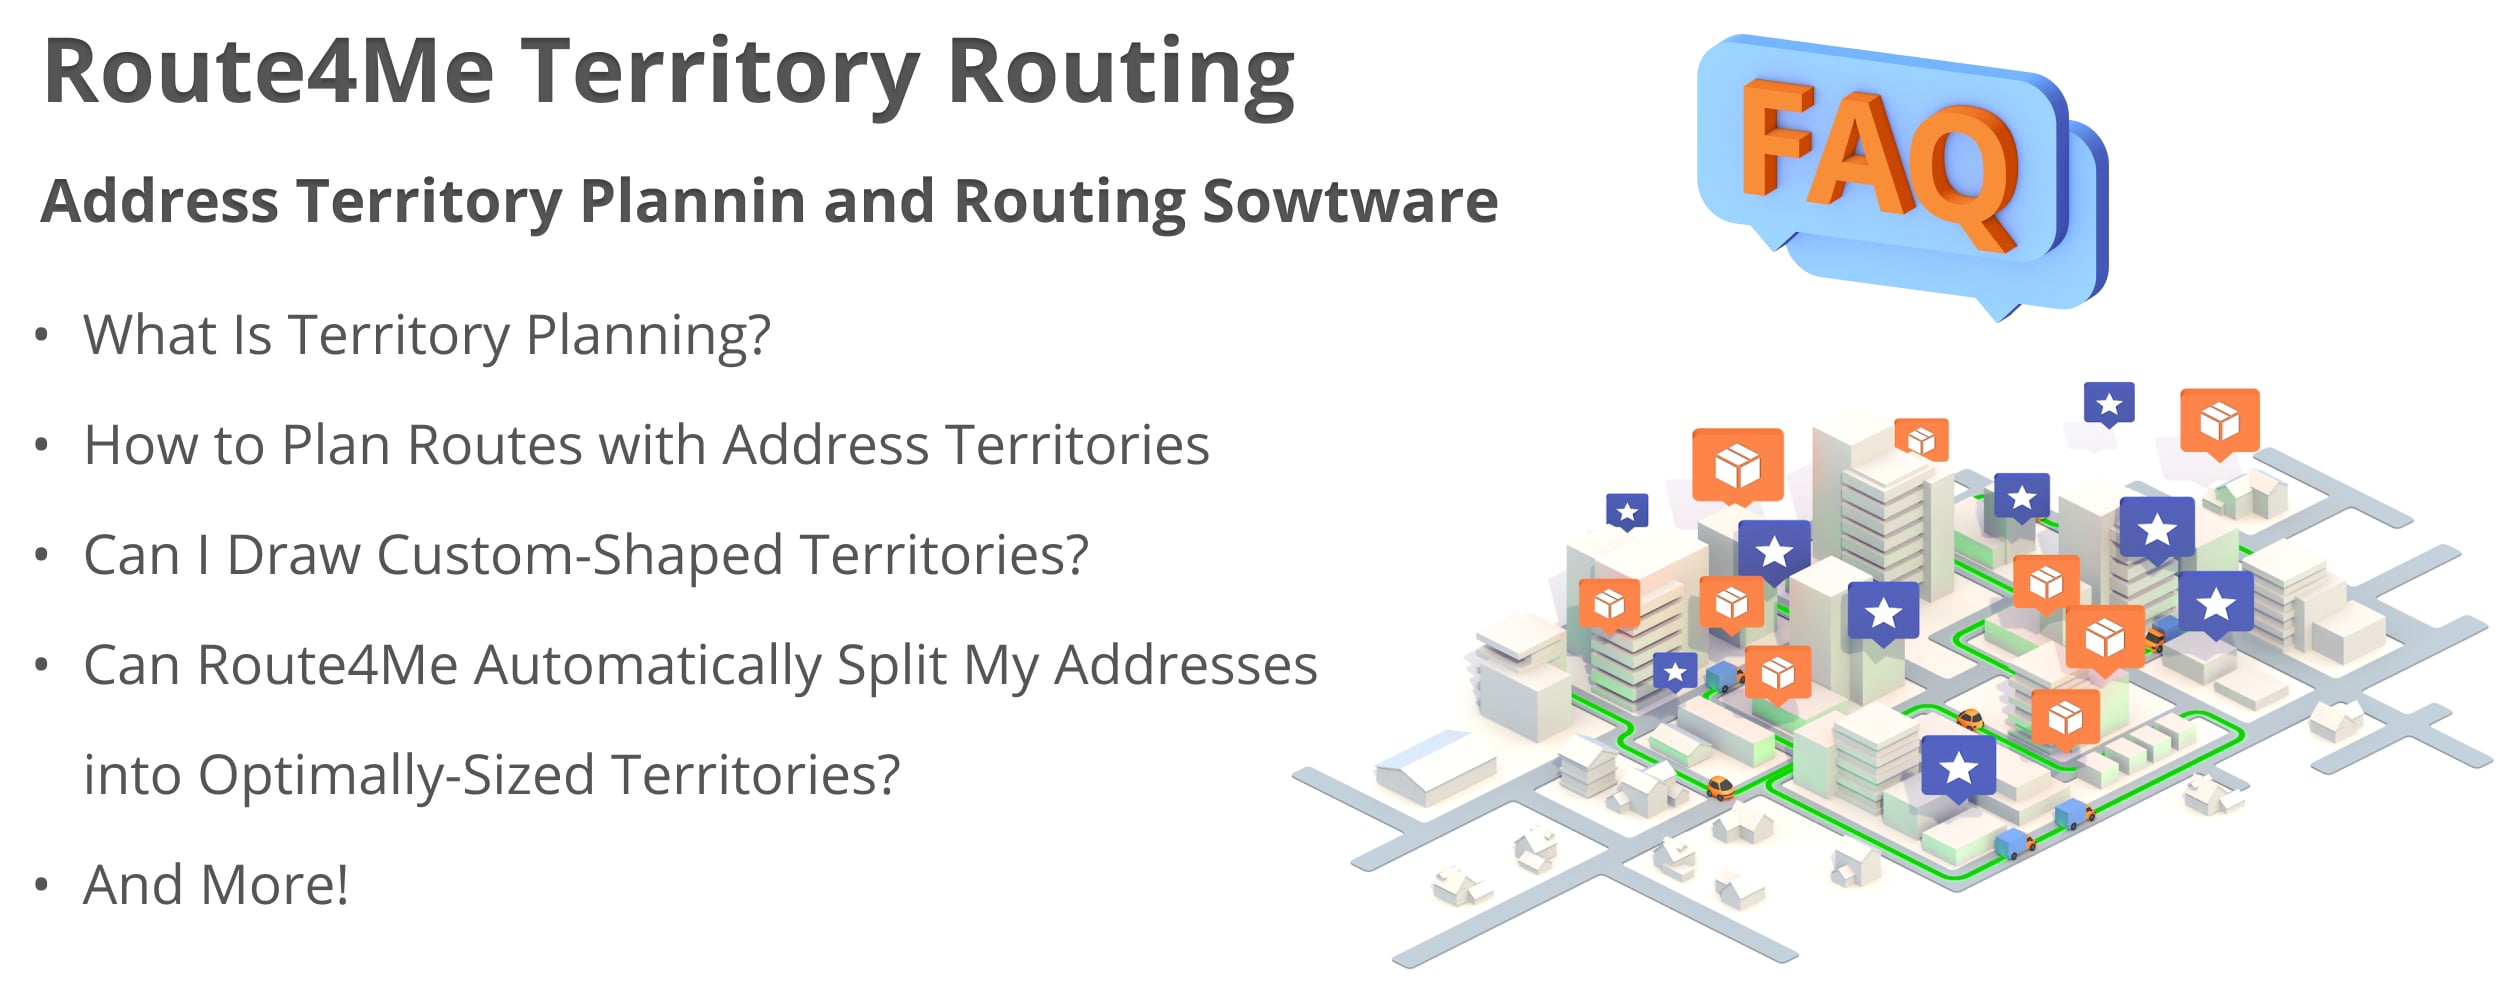 Frequently asked questions about Route4Me's address territory planning and routing, address territory management, territory planning, and more.